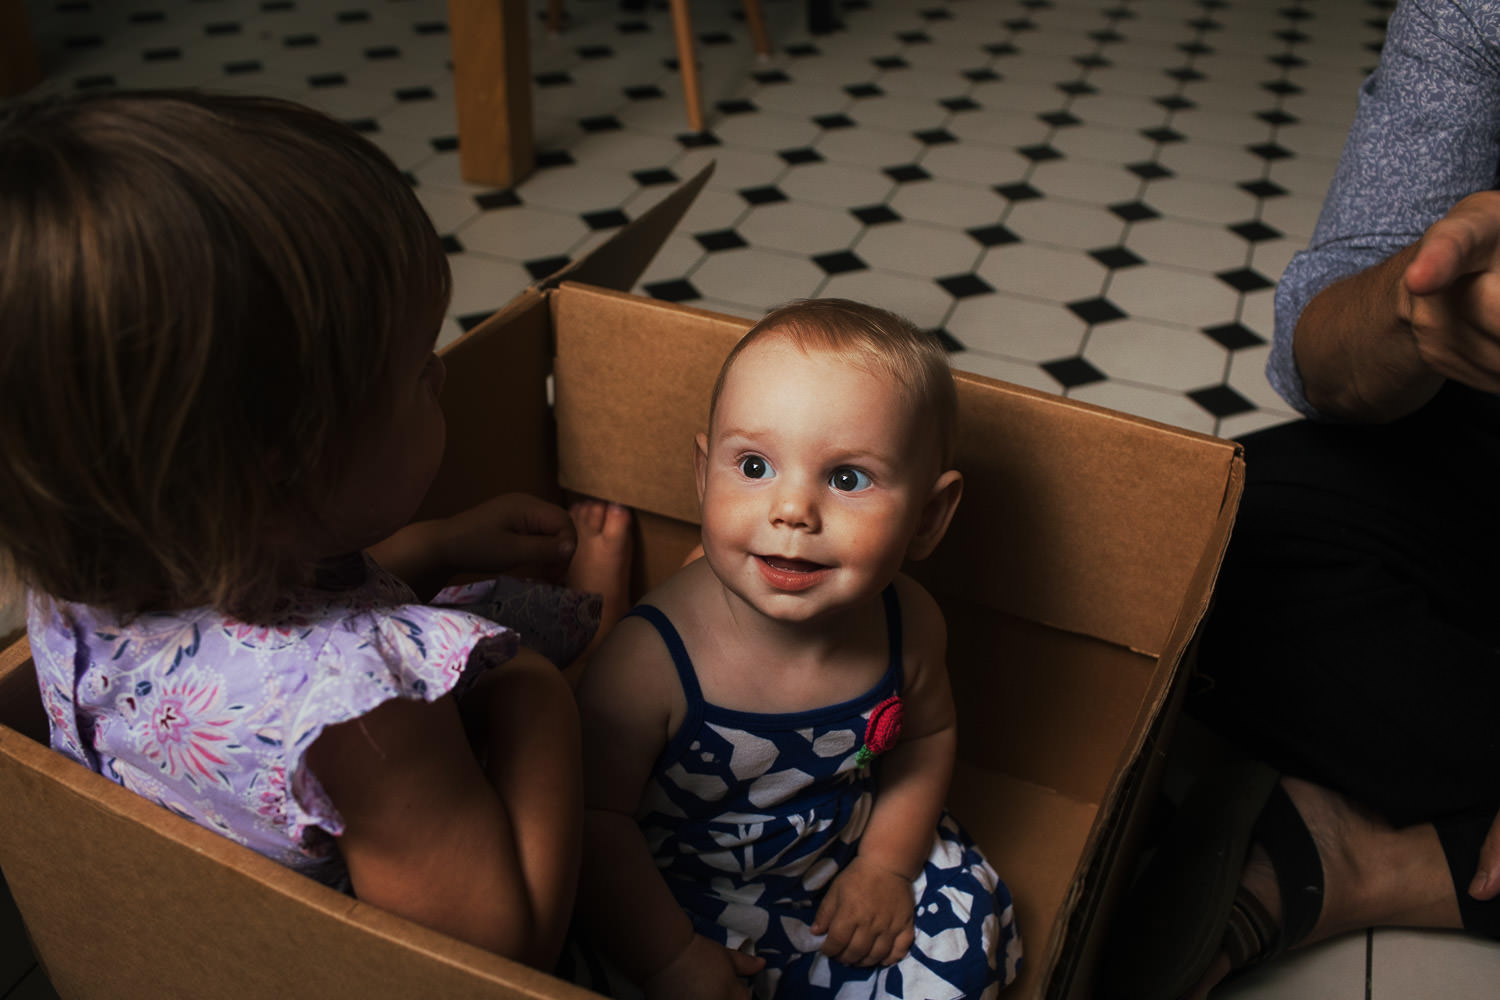 Baby and sister in a cardboard box. Documentary family photography in London.